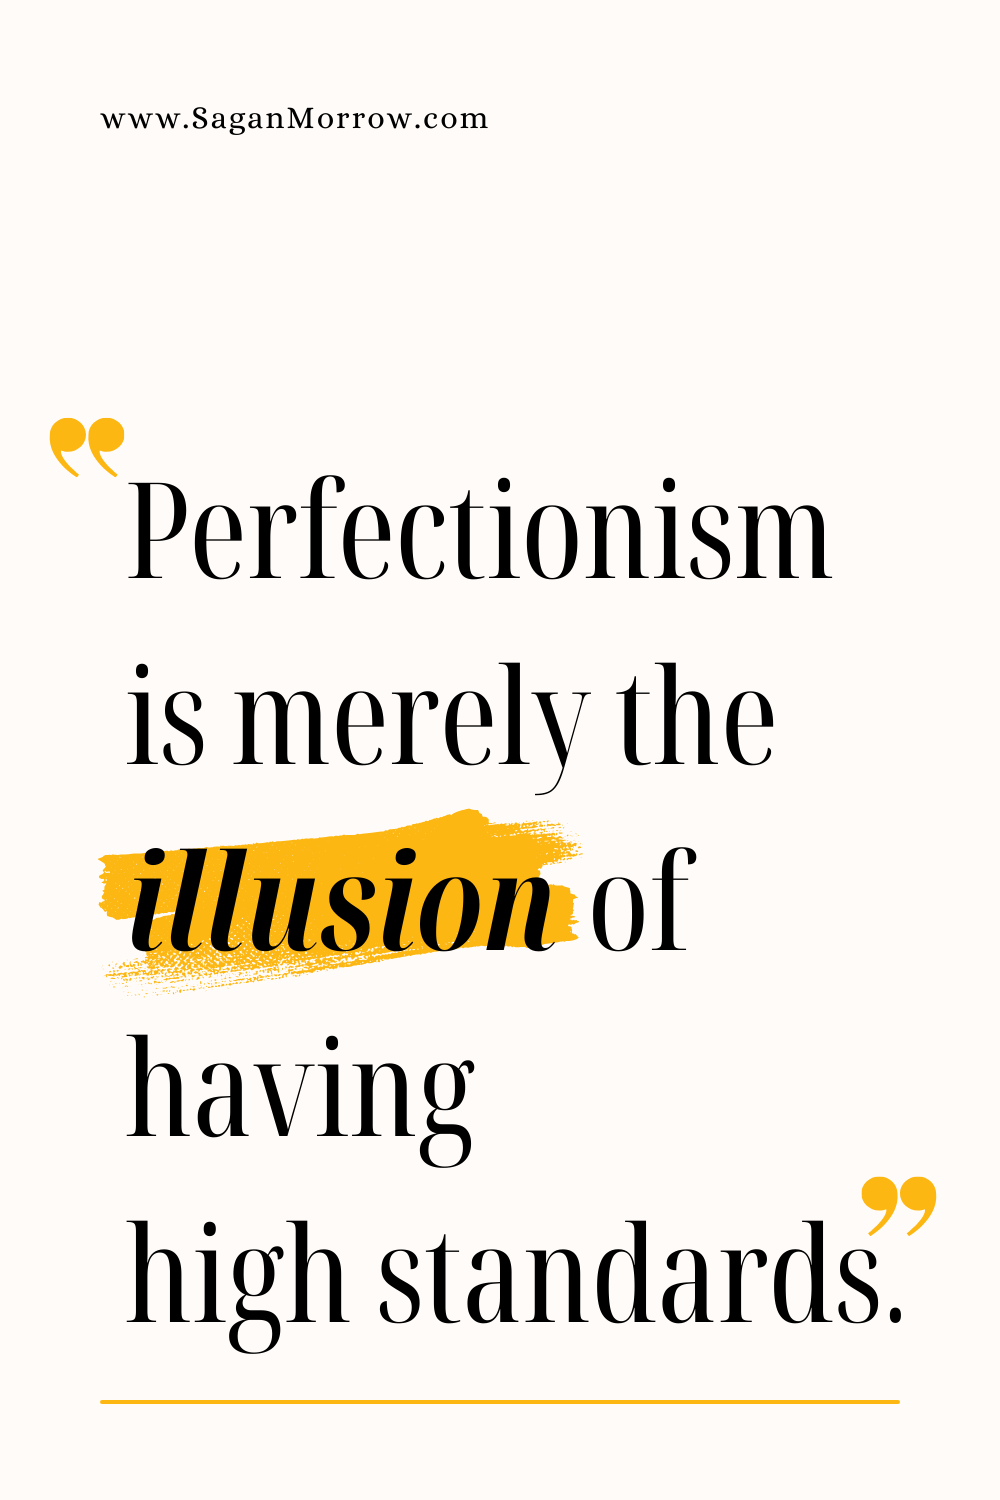 perfectionism quote - perfectionism is the illusion of high standards